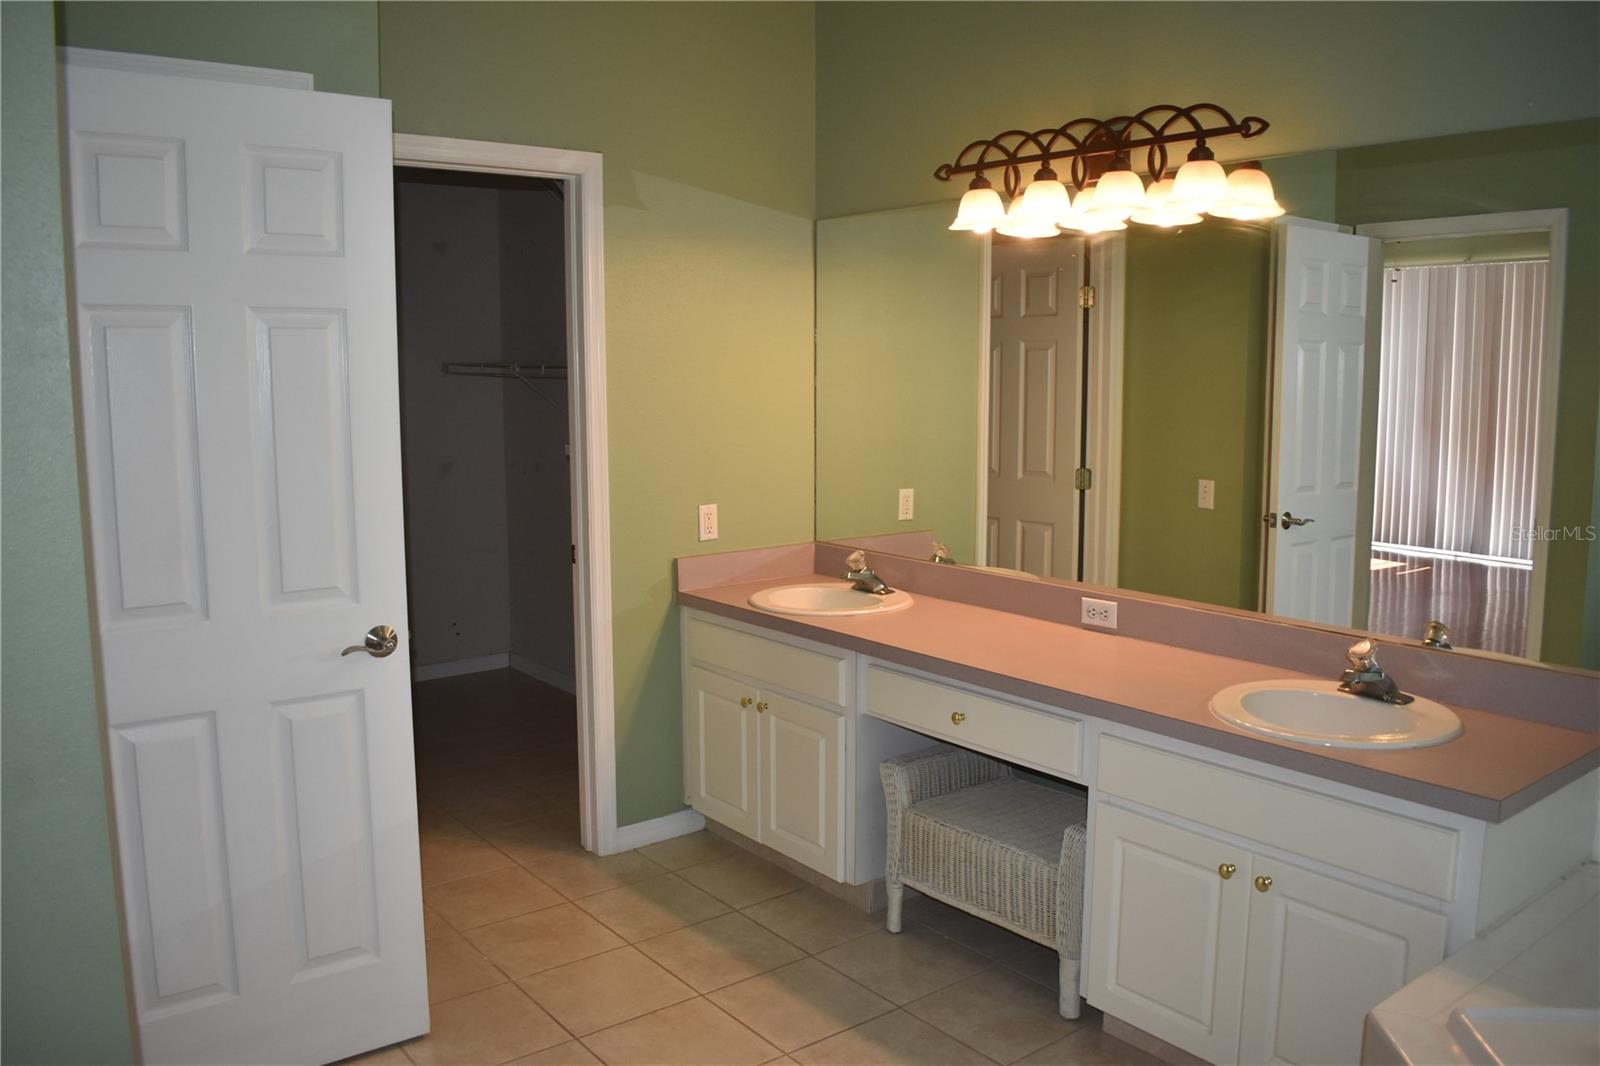 x large master bath with walk in closet walk in shower and garden tub